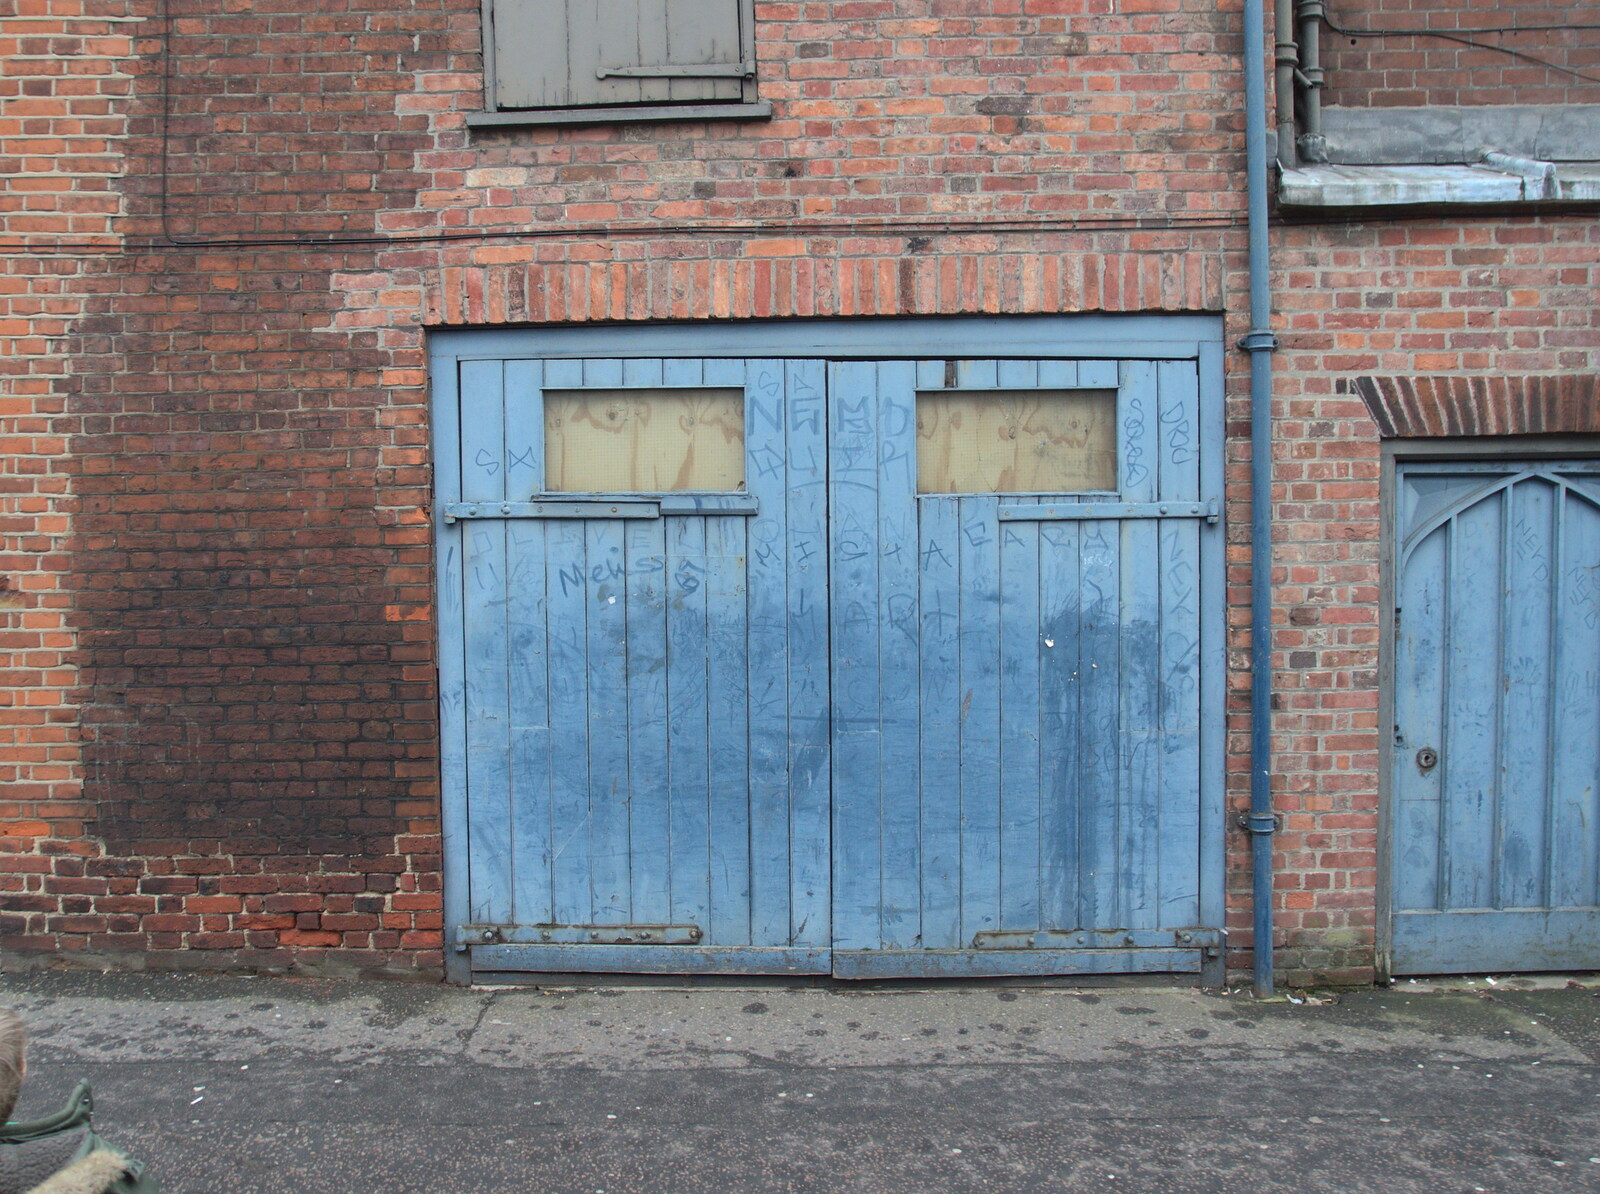 A derelict garage door from A Trip to Norwich, and Beers at The Swan Inn, Brome, Suffolk - 5th January 2015